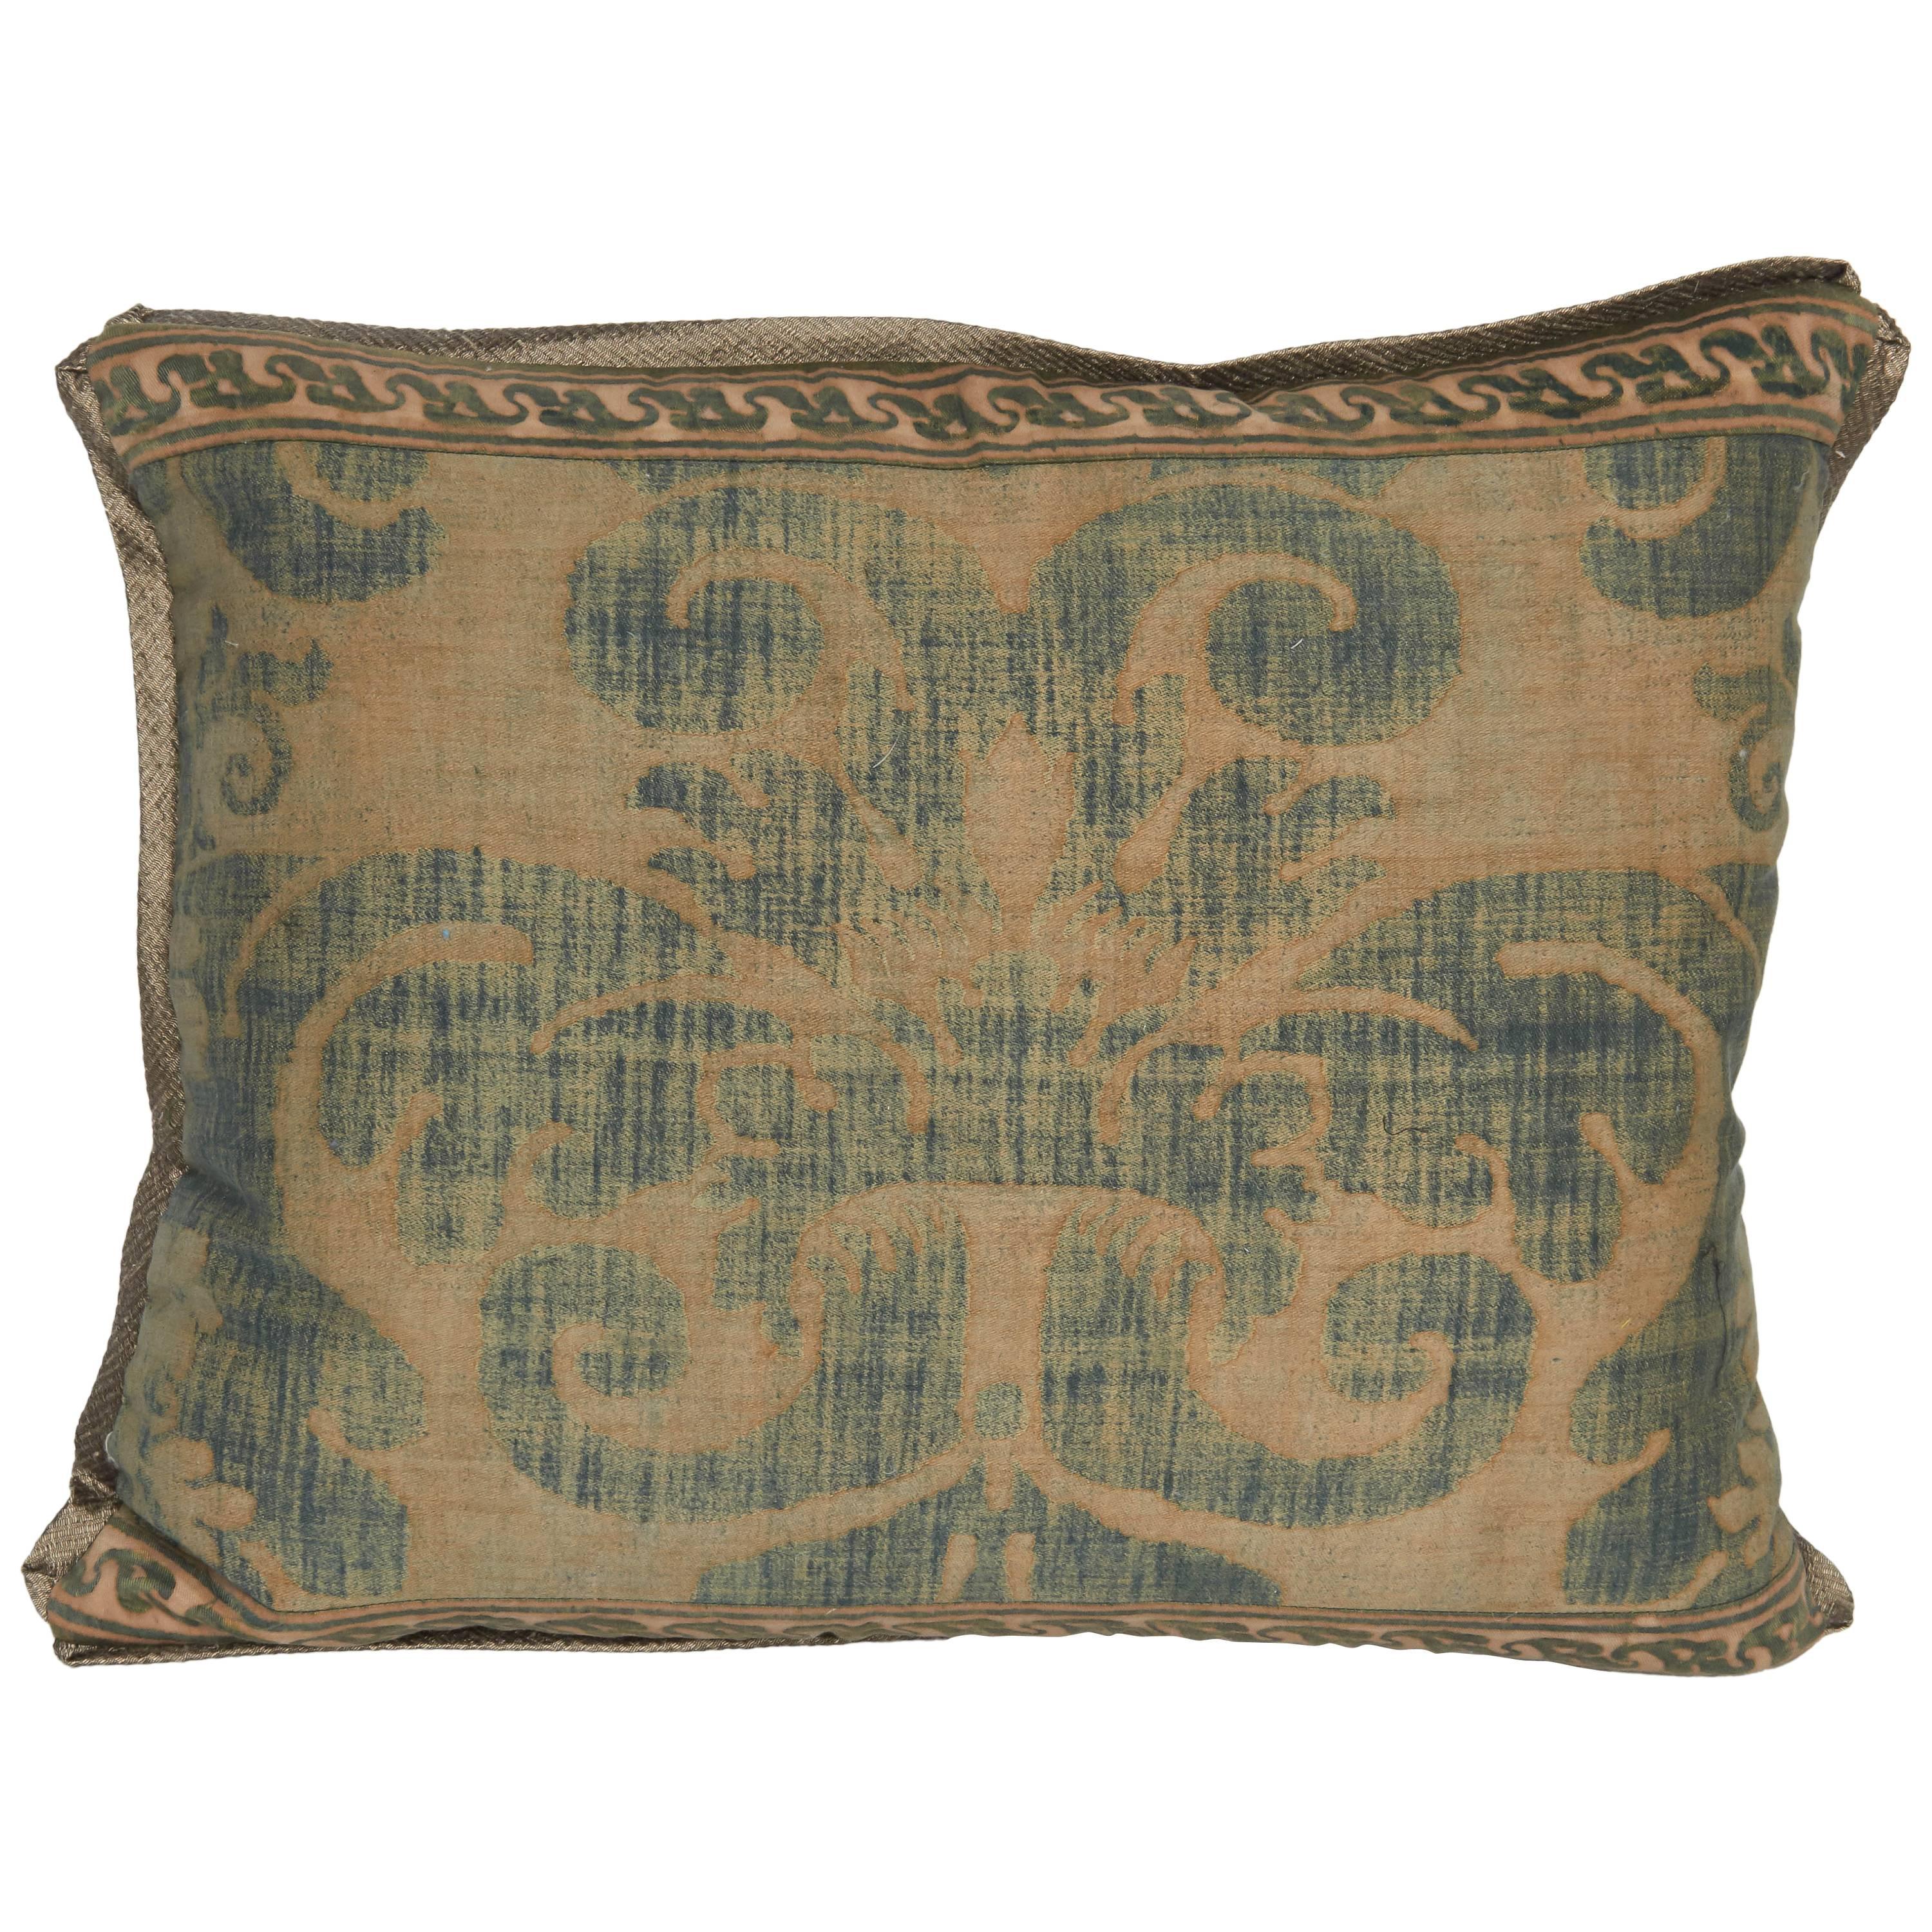 Single Vintage Fortuny Fabric Cushion in the Tulipano Pattern